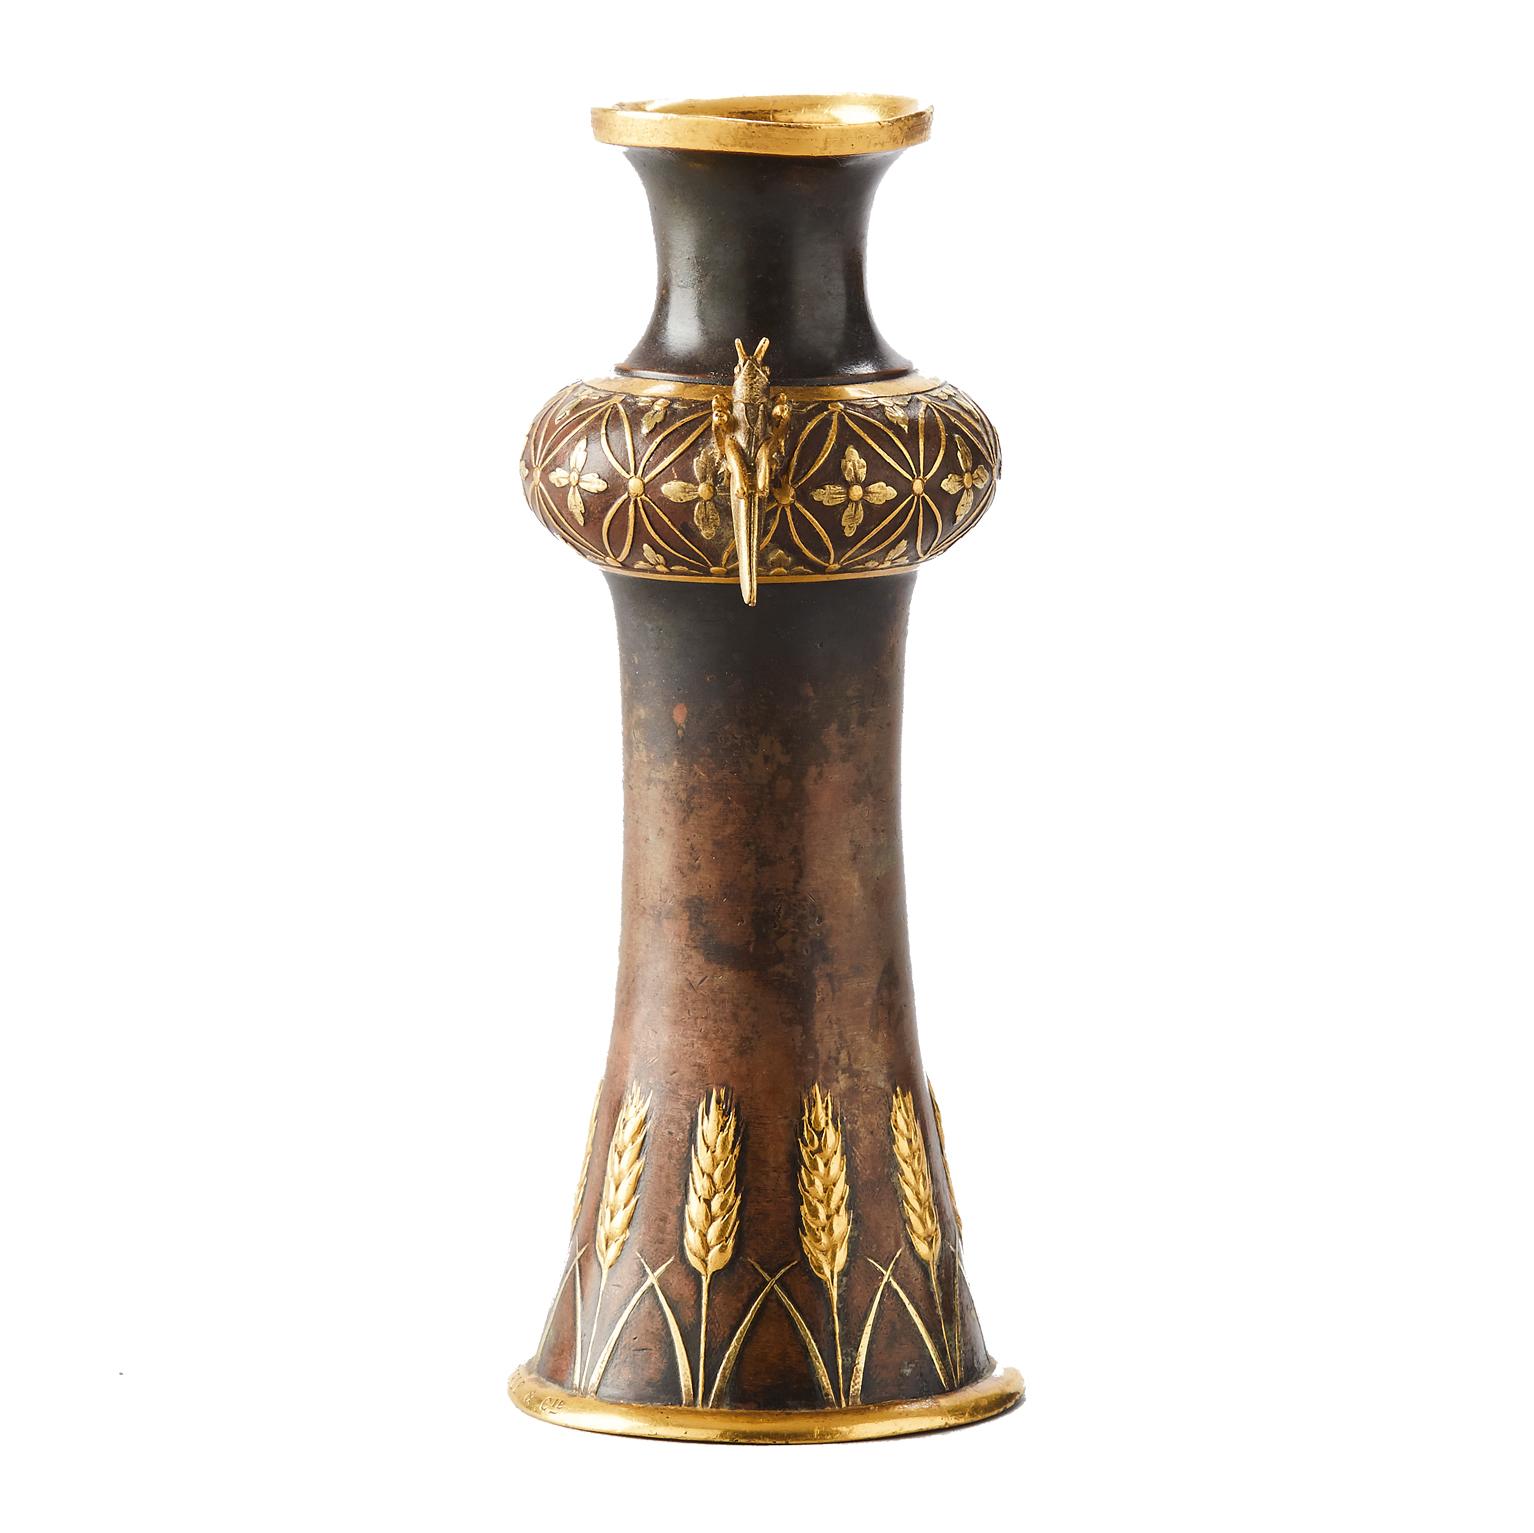 A Bronze Vase, chiseled and partially gilt bronze en relief decorated with grasshoppers and wheat axes. The best of French Art Nouveau, Christofle et Cie by Emilé Reiber, Paris 1970s. Emilé Reiber, 1826-1893. 
Stamped.
Measures: 13.5 x 5 cm